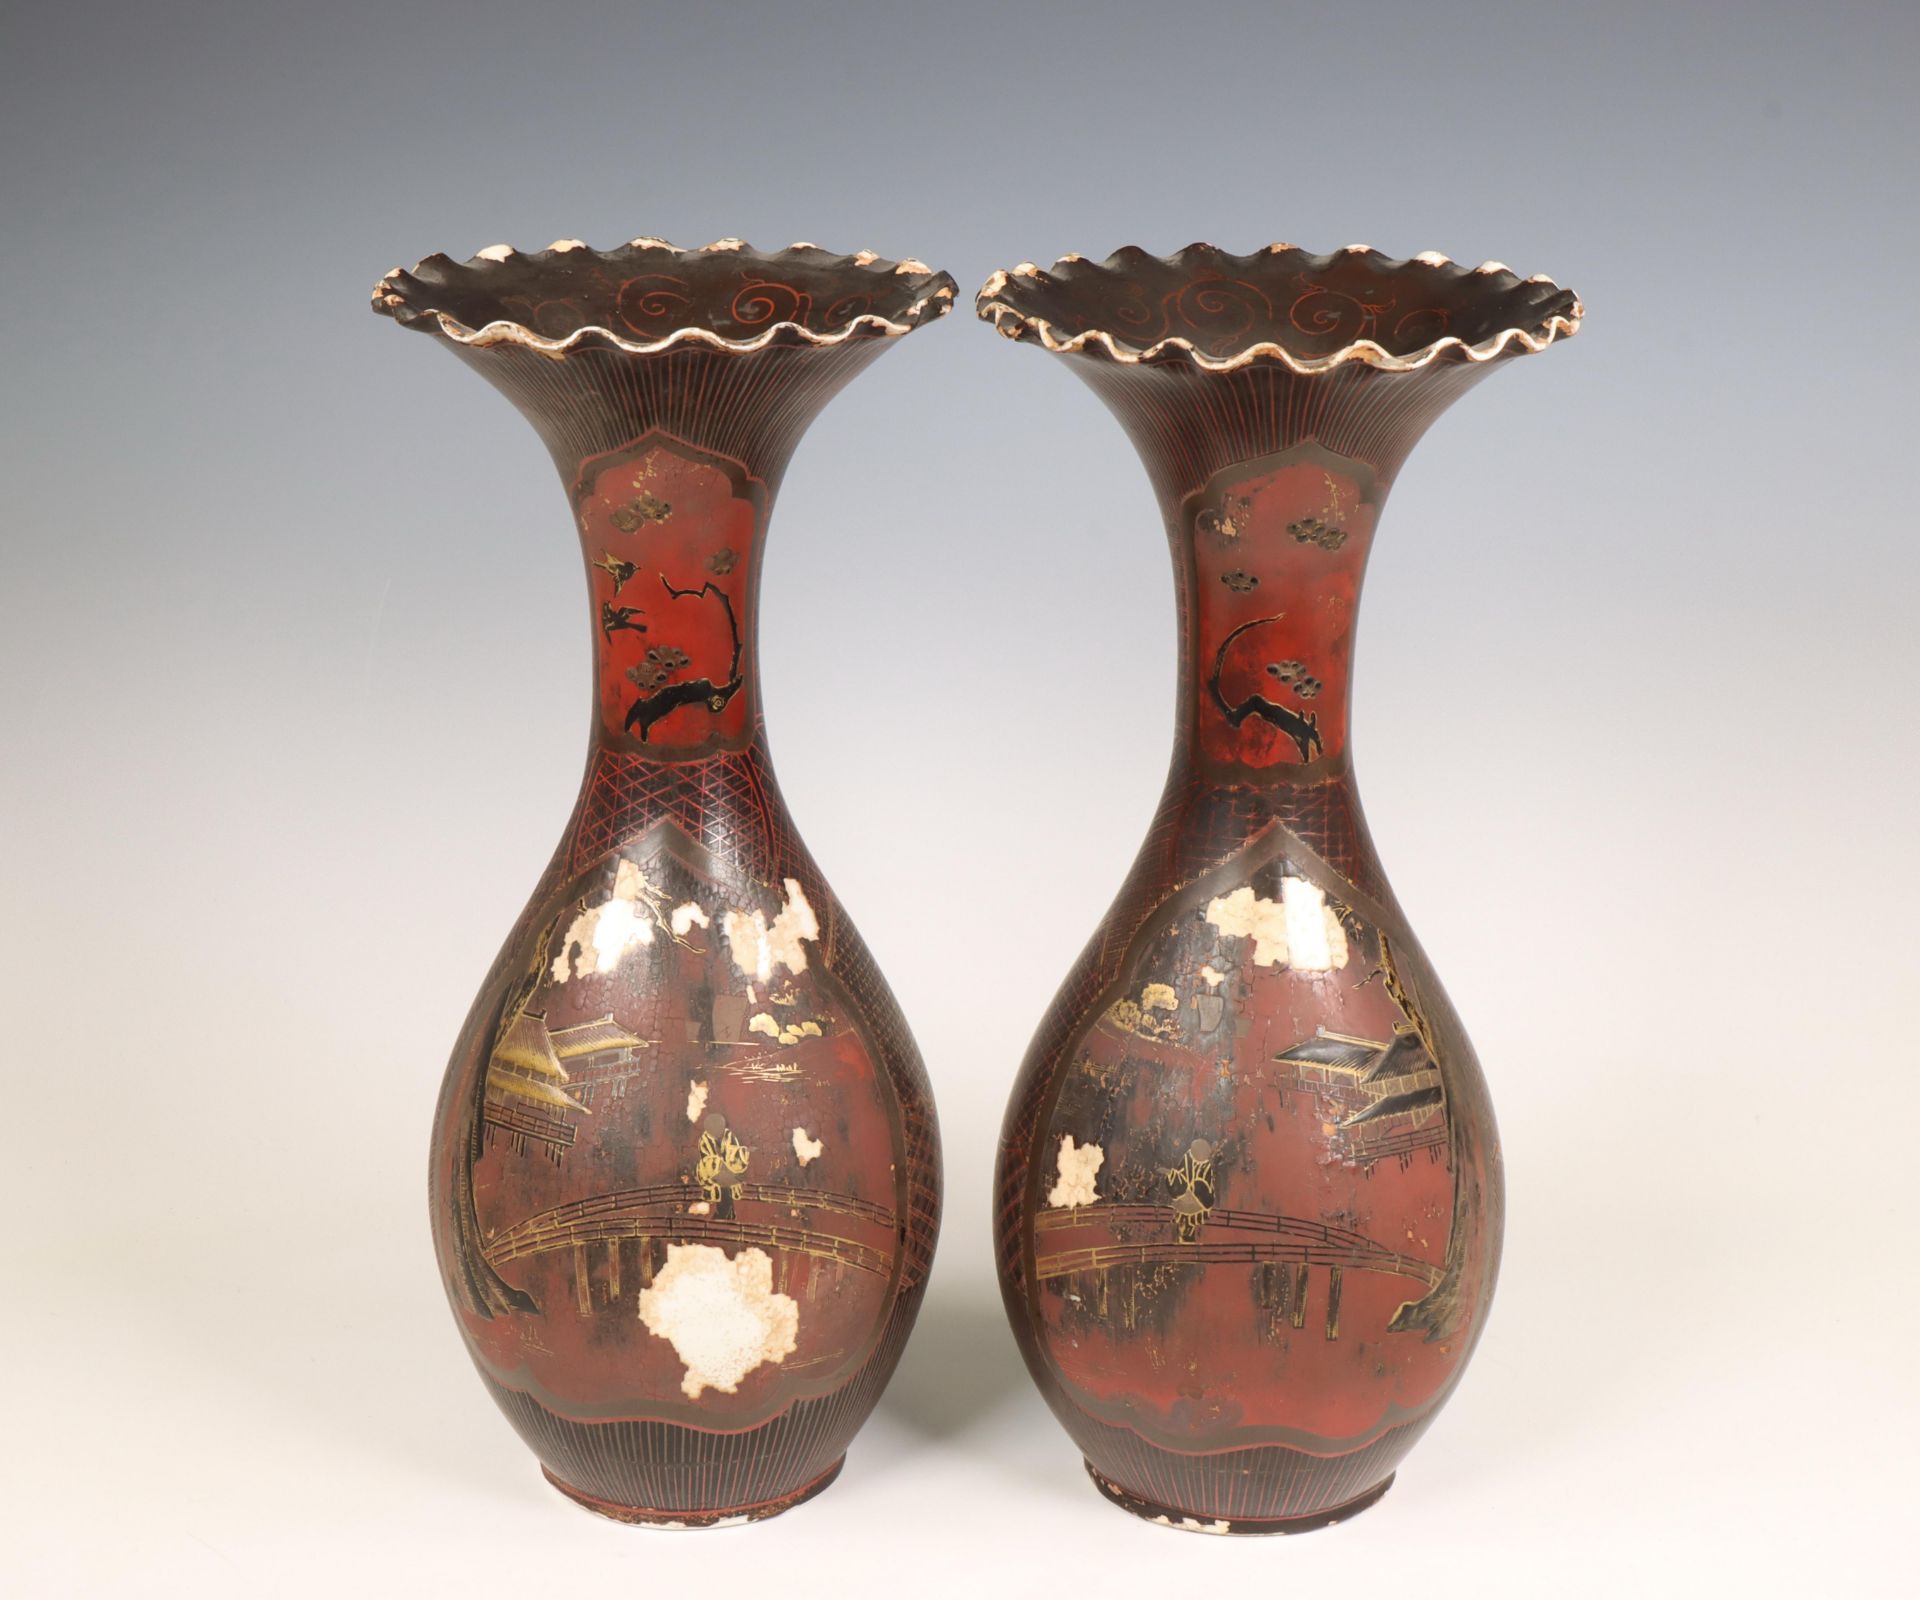 Japan, a pair of lacquer decorated porcelain vases, Meiji period (1868-1912), - Image 3 of 3